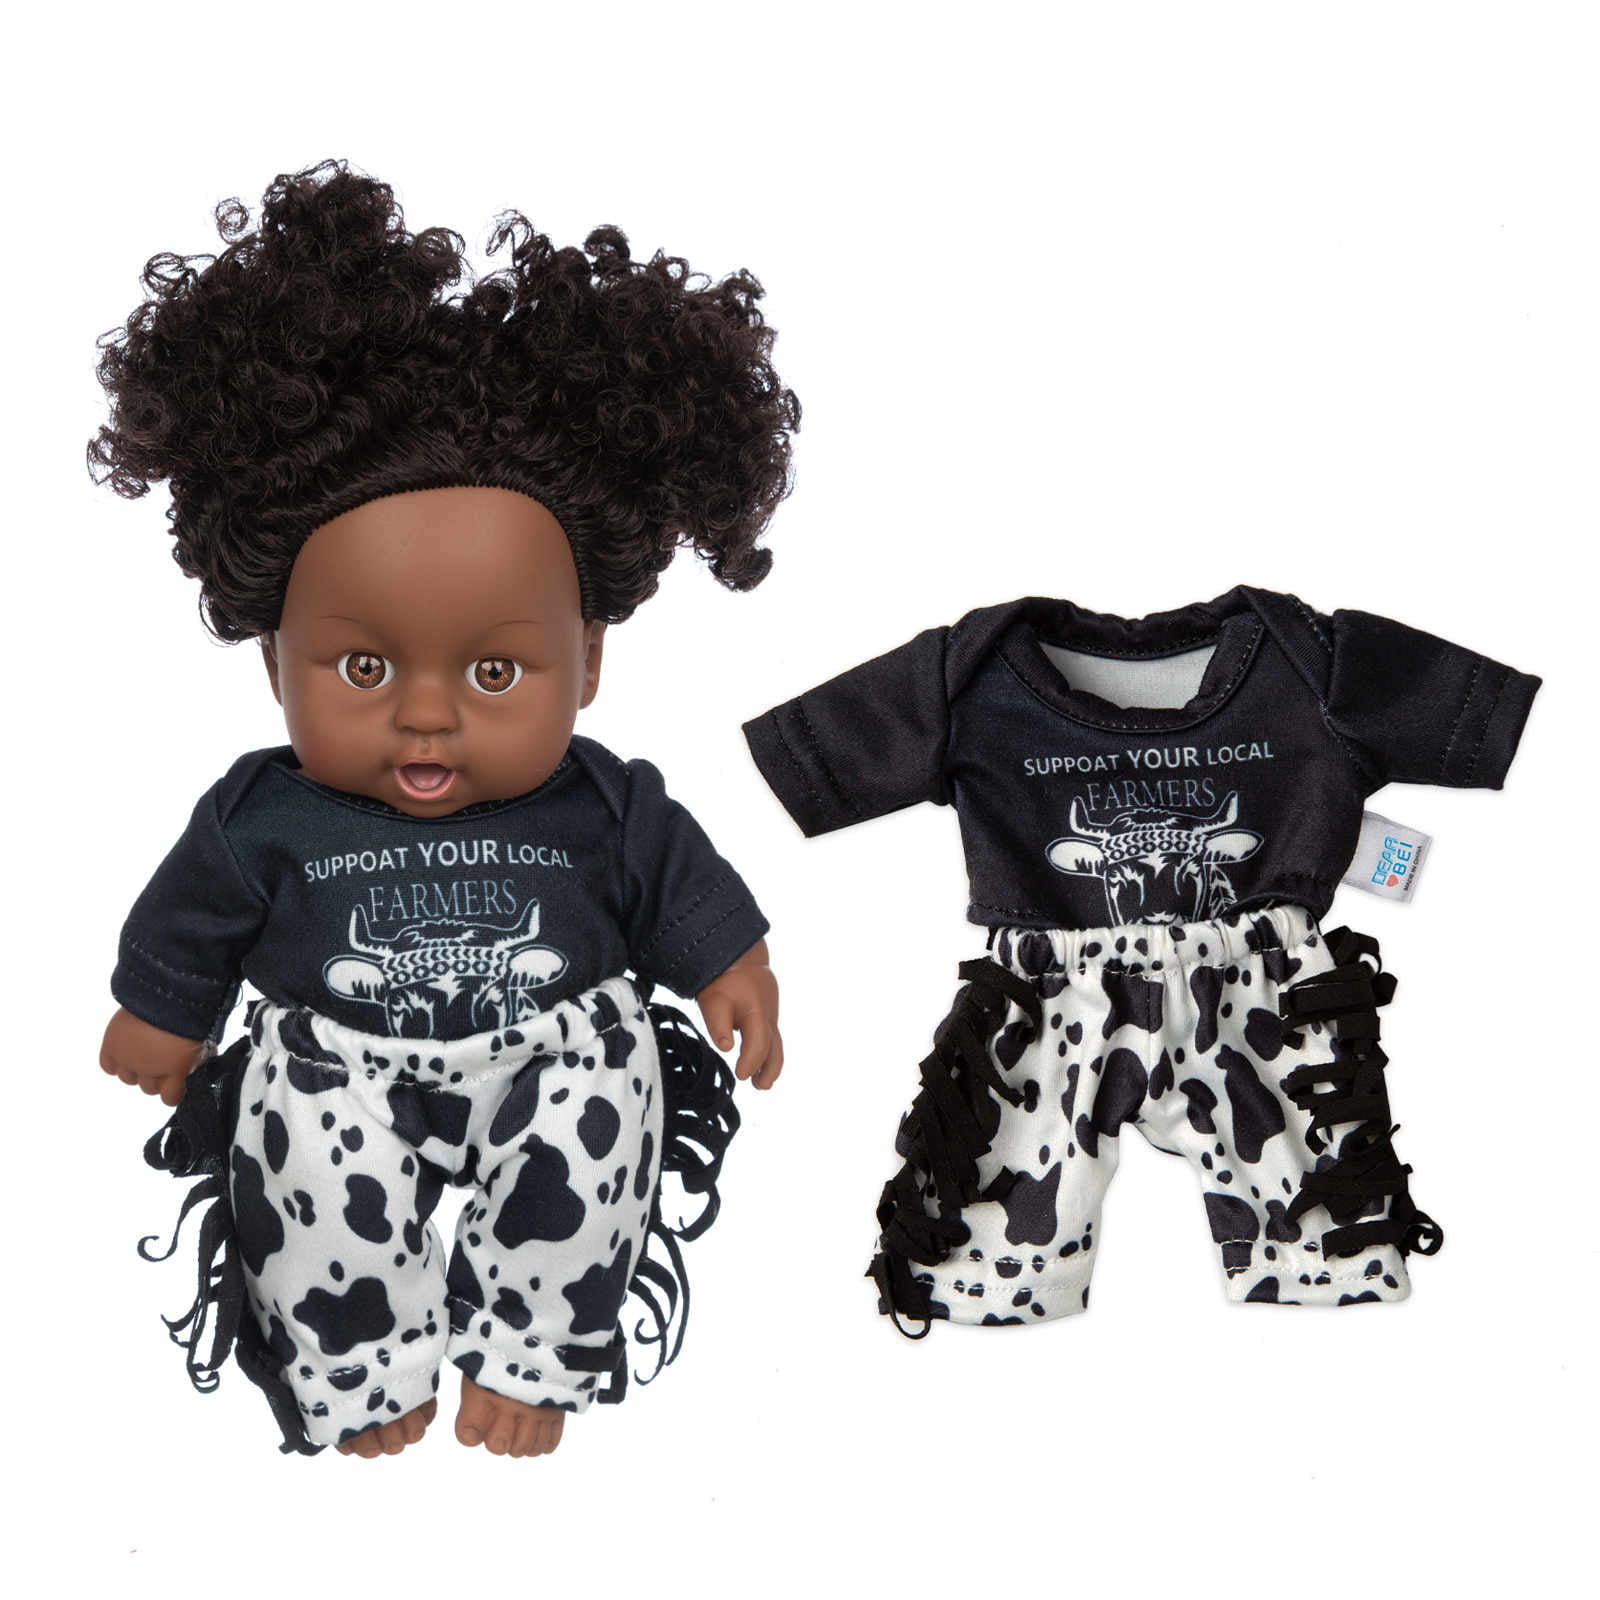 qucoqpe 12Inch Black Baby Doll Set - African American Doll Set |Realistic  Baby Doll Black Girl and Boy Baby Doll | Baby Dolls for 2 Year Old Girls 